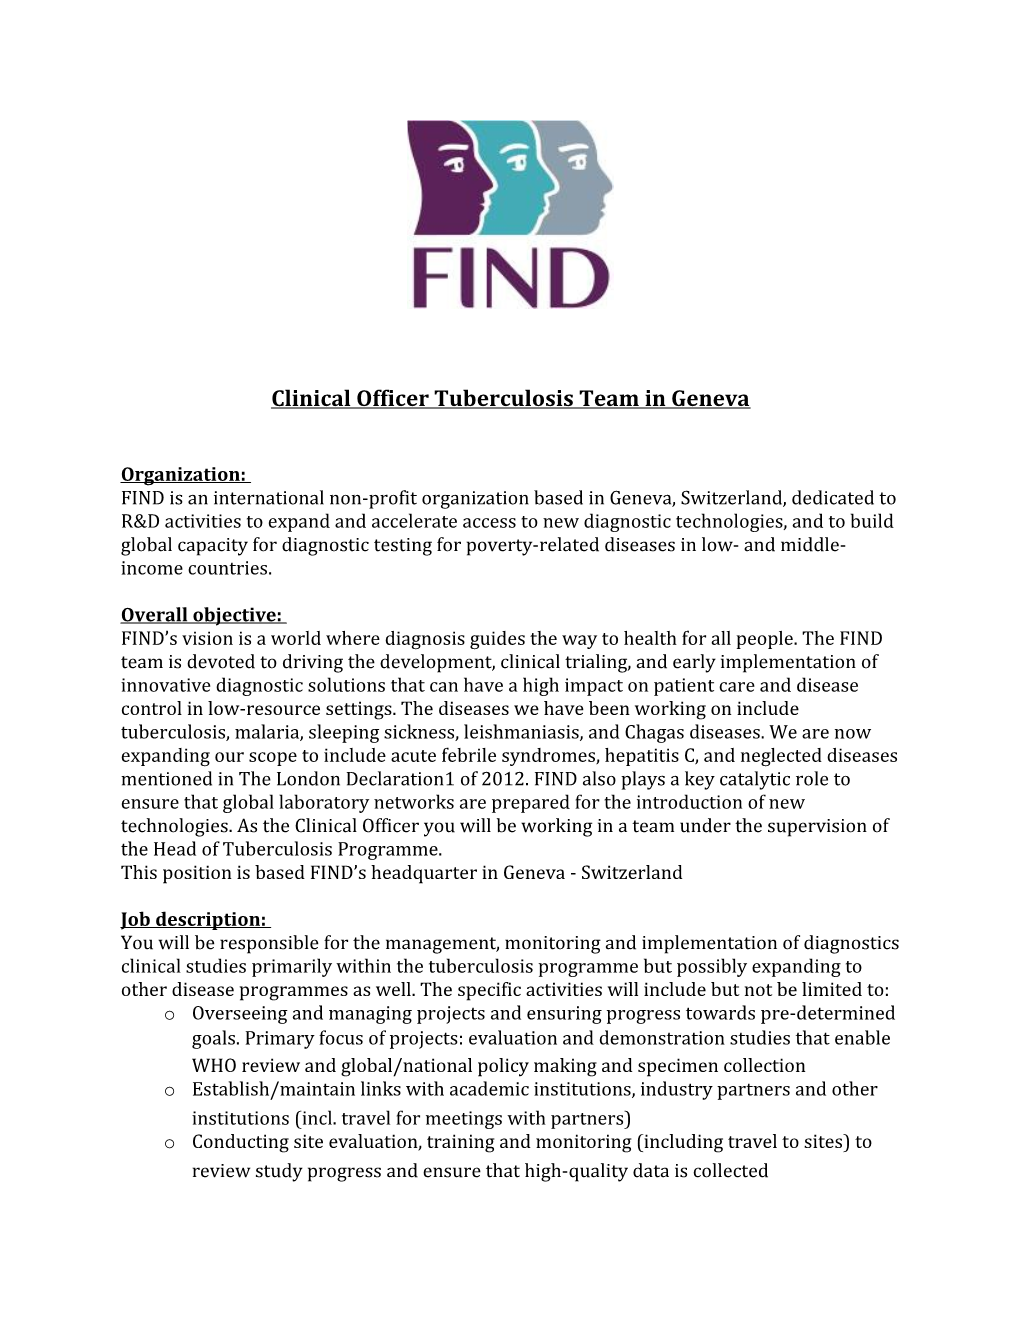 Clinical Officer Tuberculosis Team in Geneva